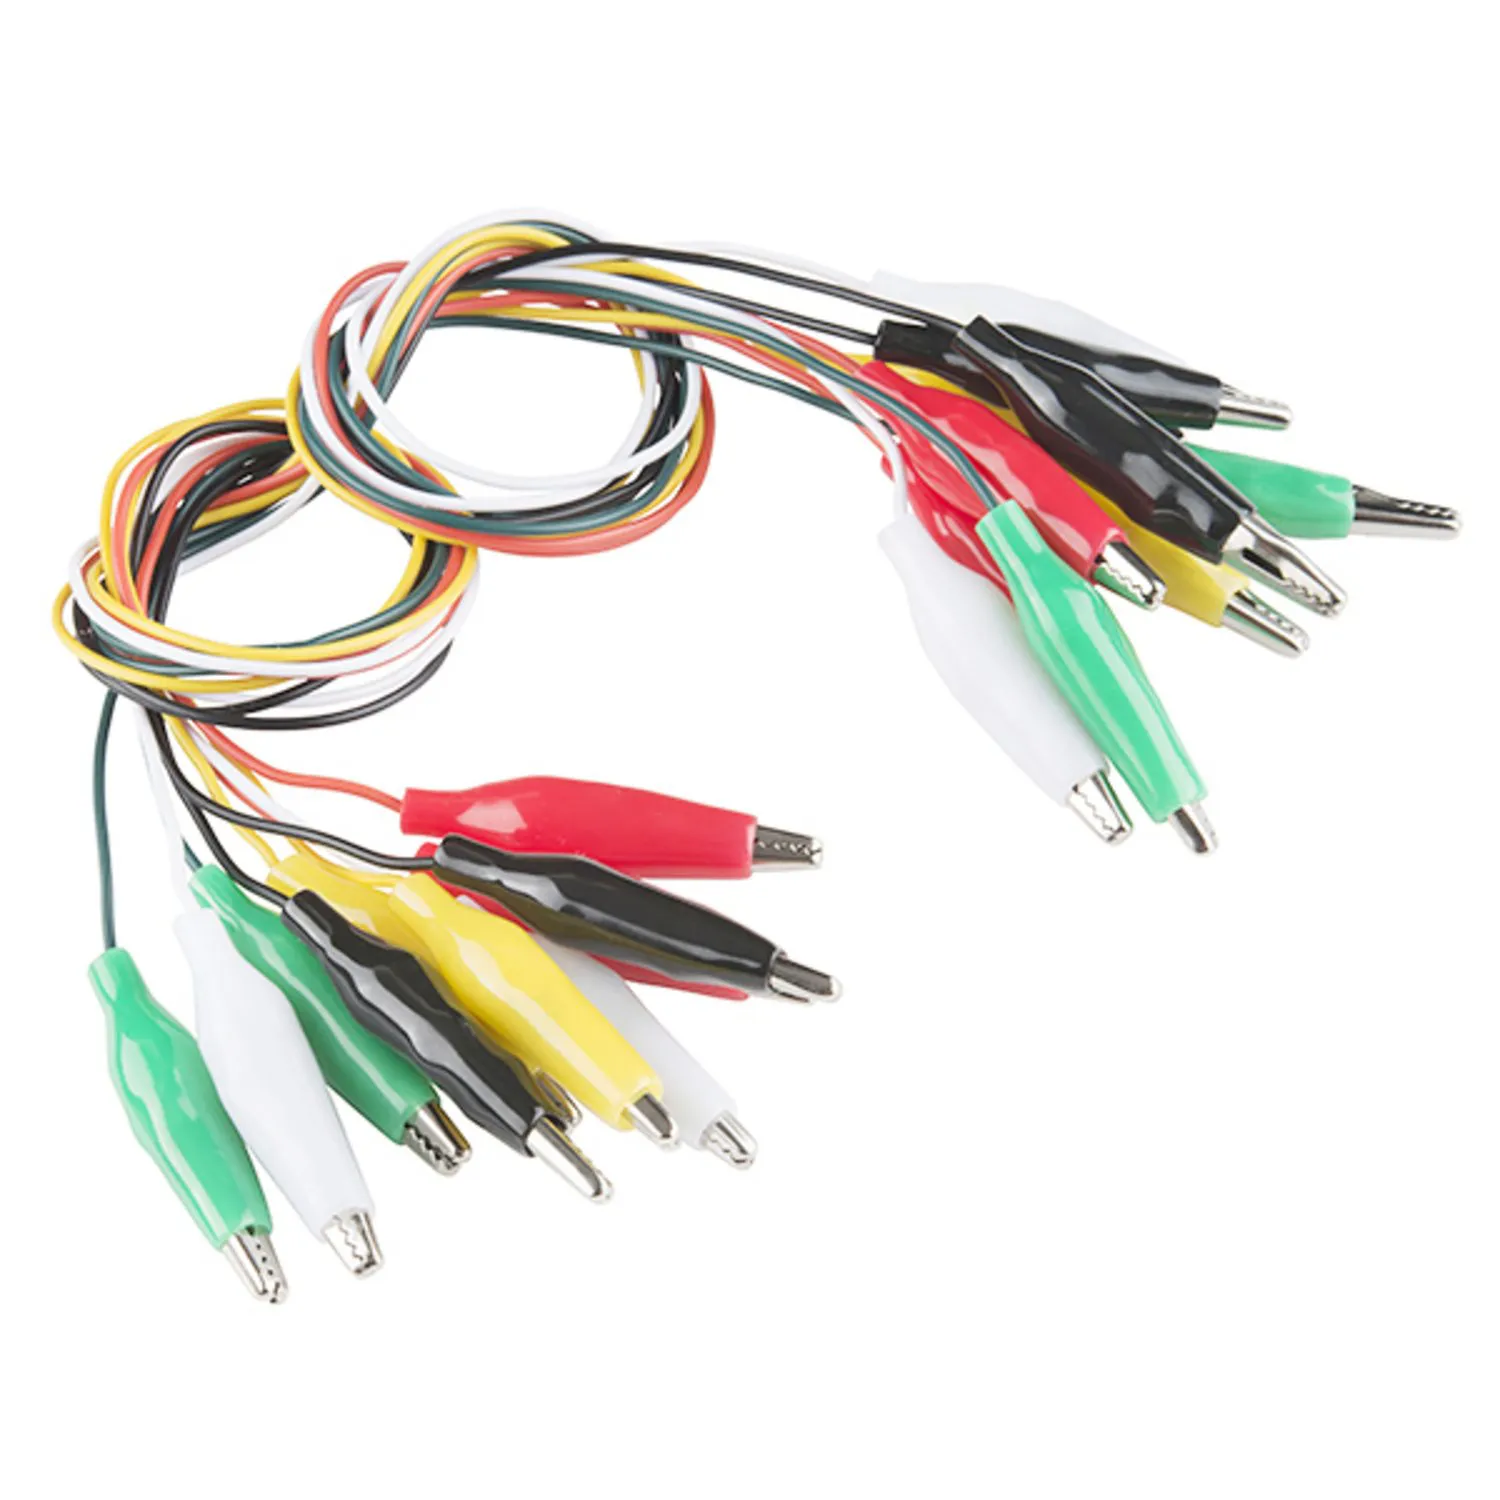 Photo of Alligator Test Leads - Multicolored (10 Pack)